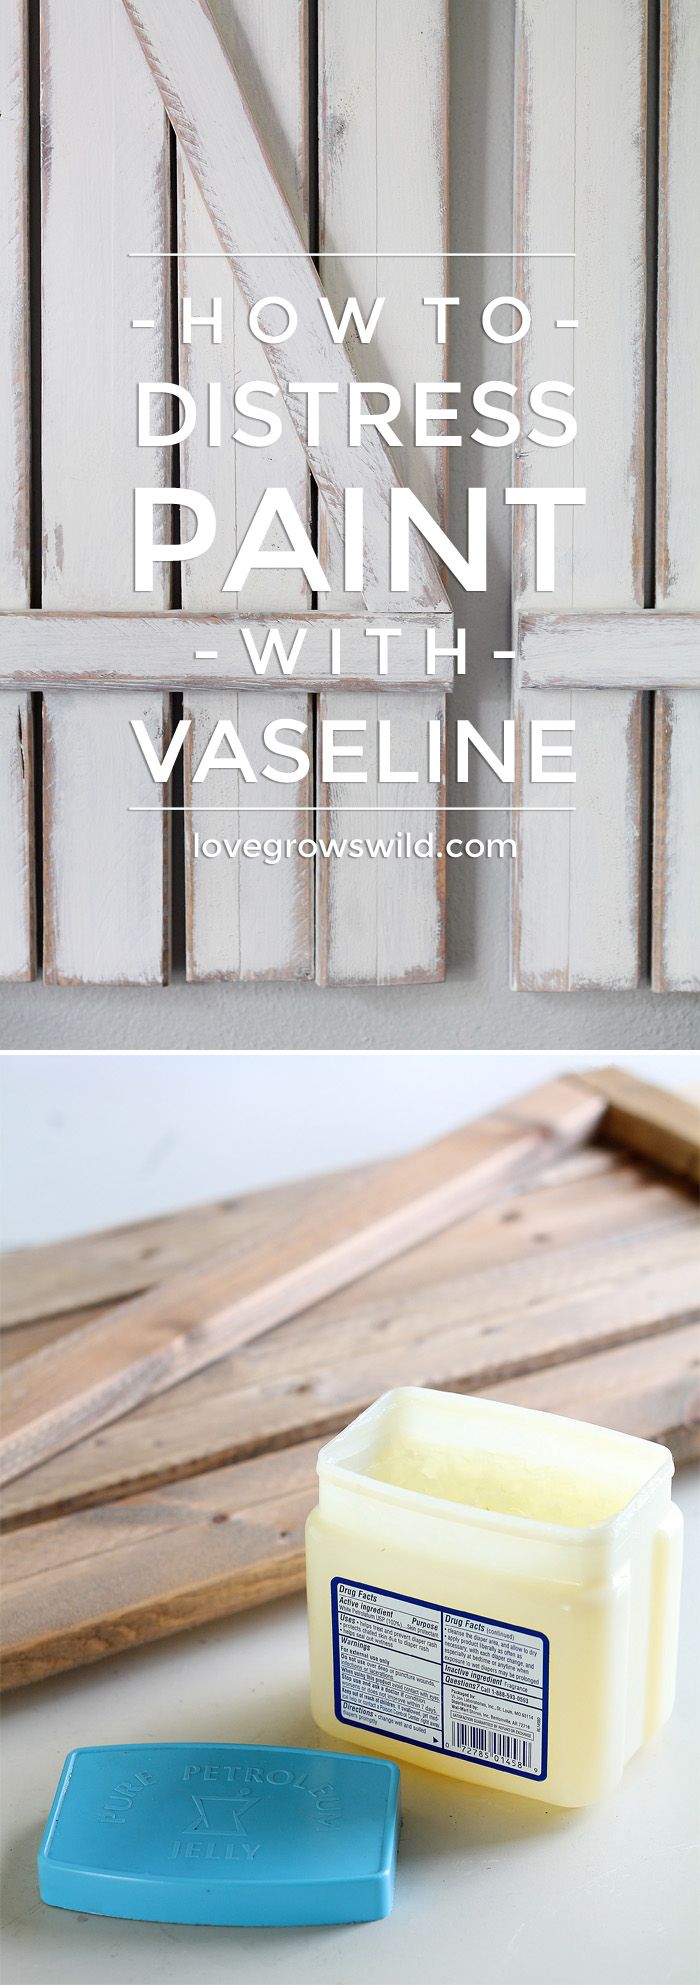 How to Distress Paint with Vaseline - Love Grows Wild